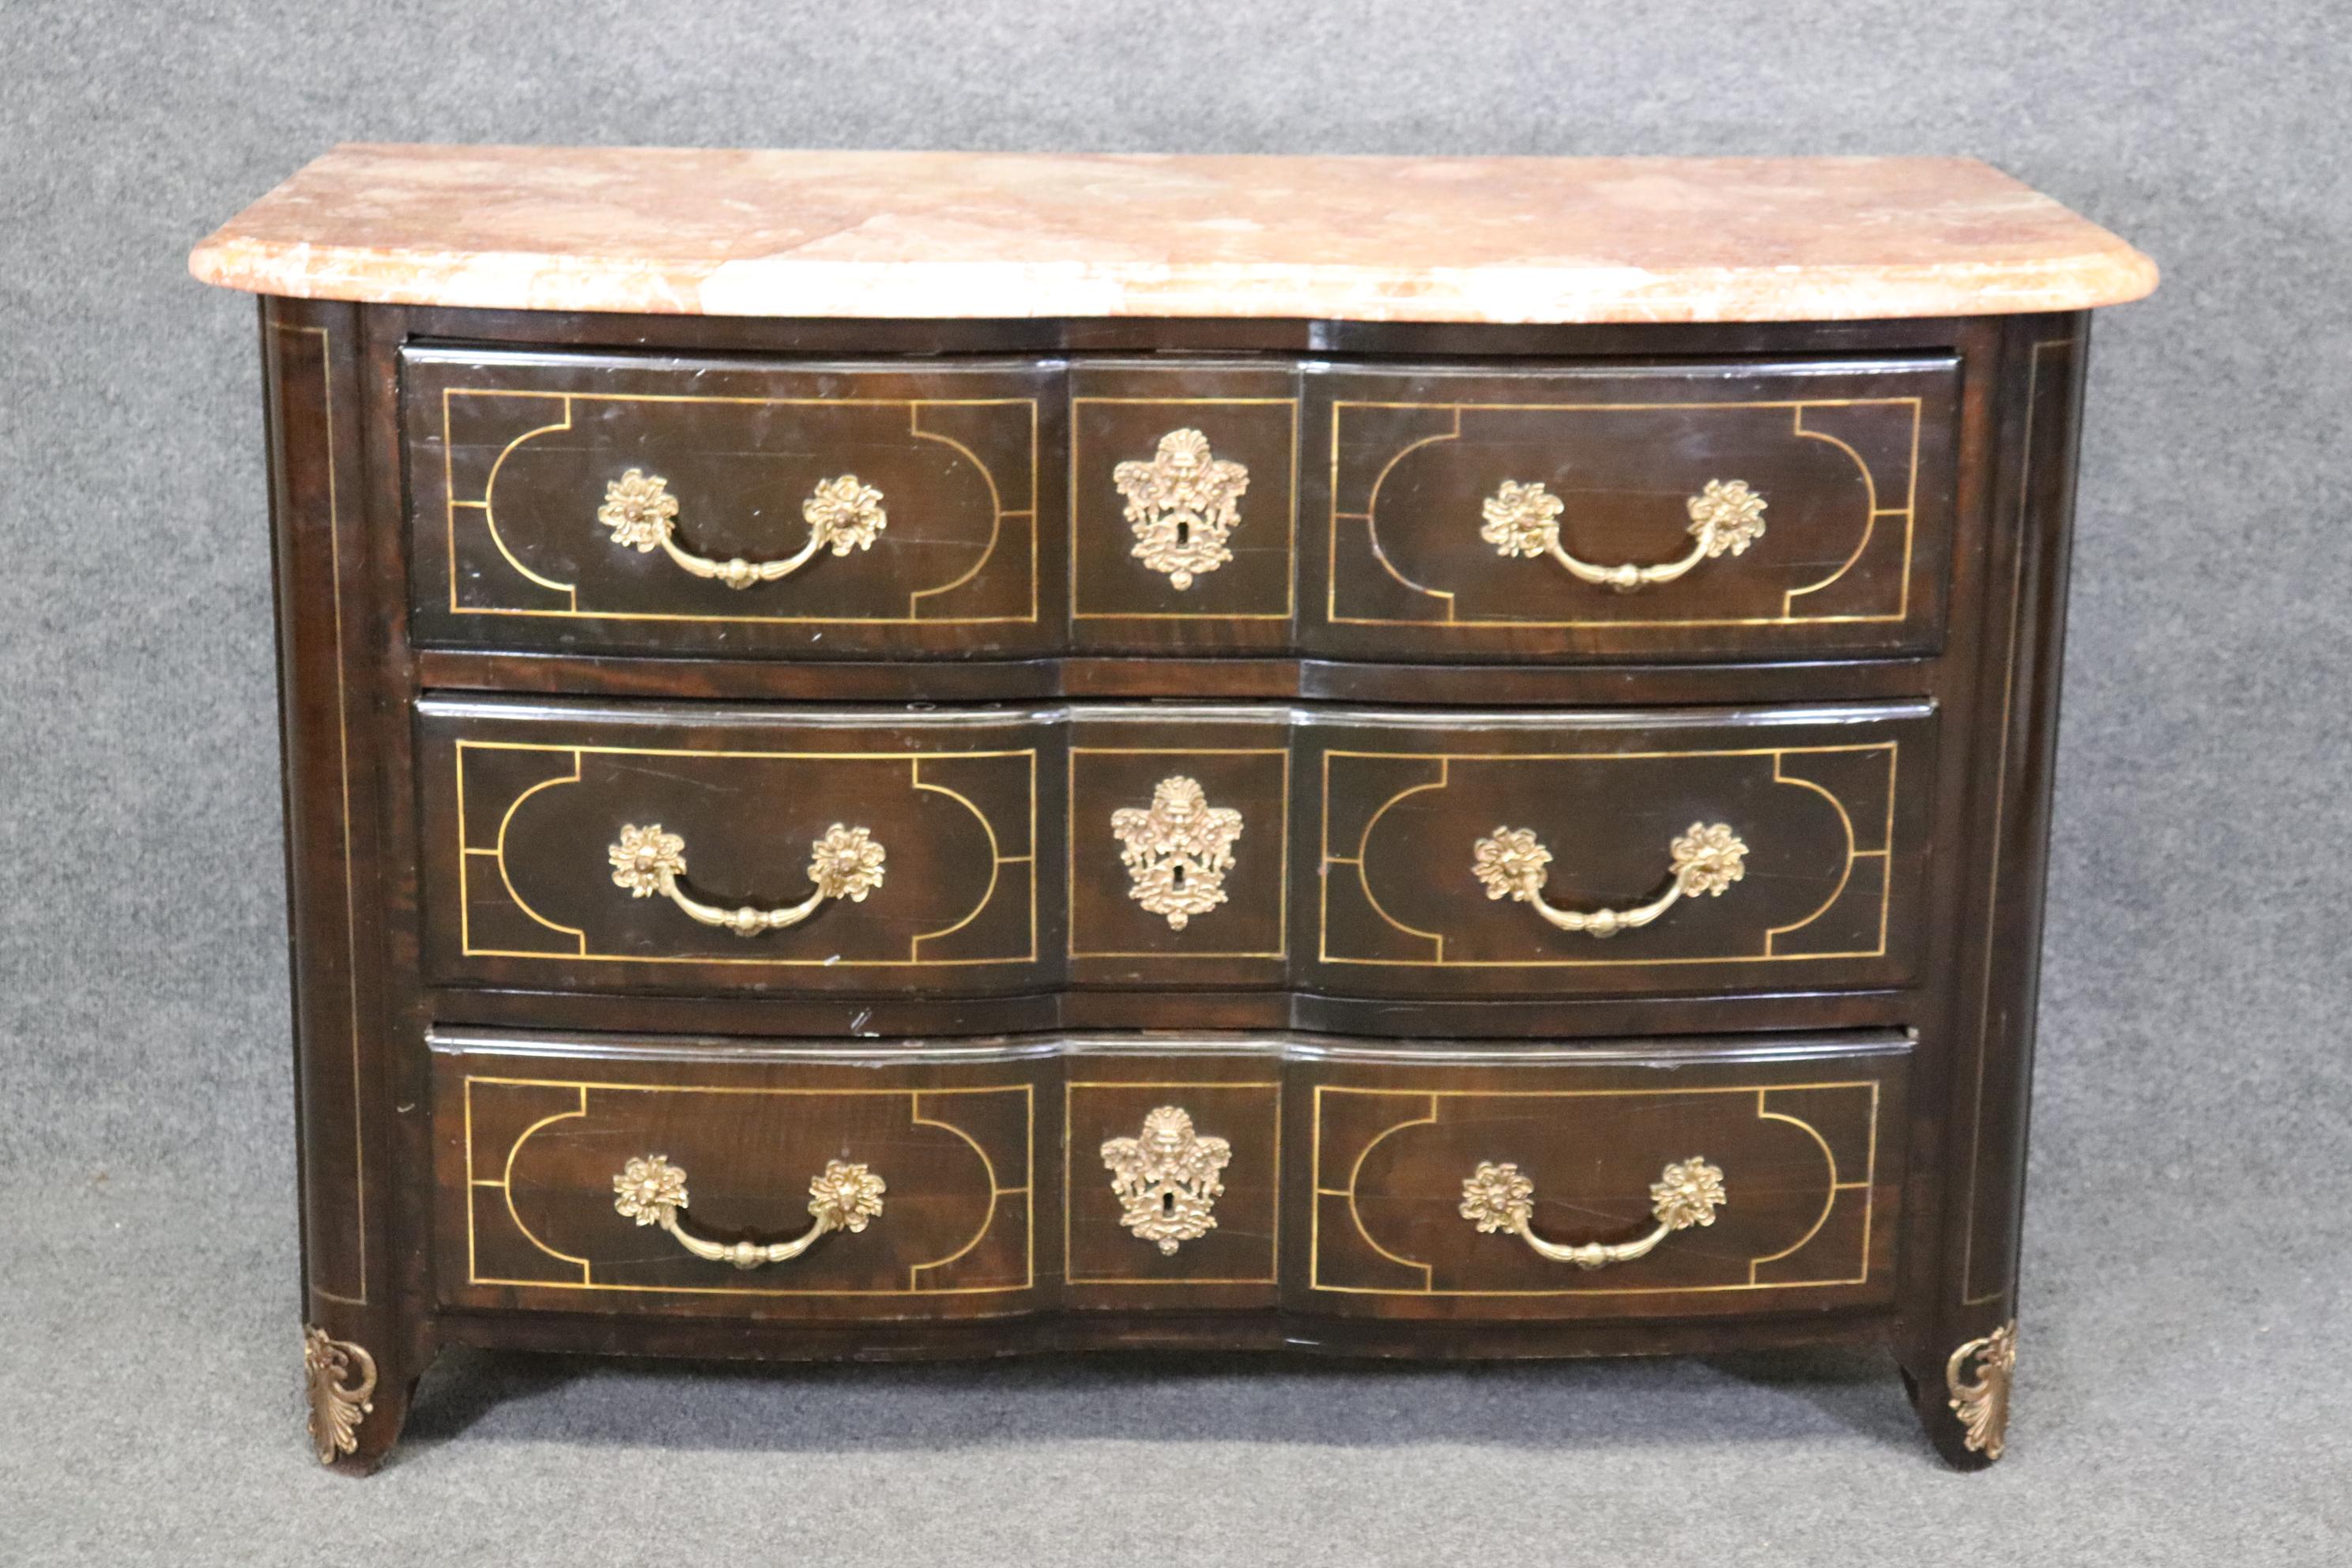 Dimensions: Height: 33 in Width: 49 1/4 in Depth: 22 3/4 in 

This vintage French Regency style marble top commode is a great example of quality french furniture! If you look at the photos provided, you will see the detailed brass inlay as well as